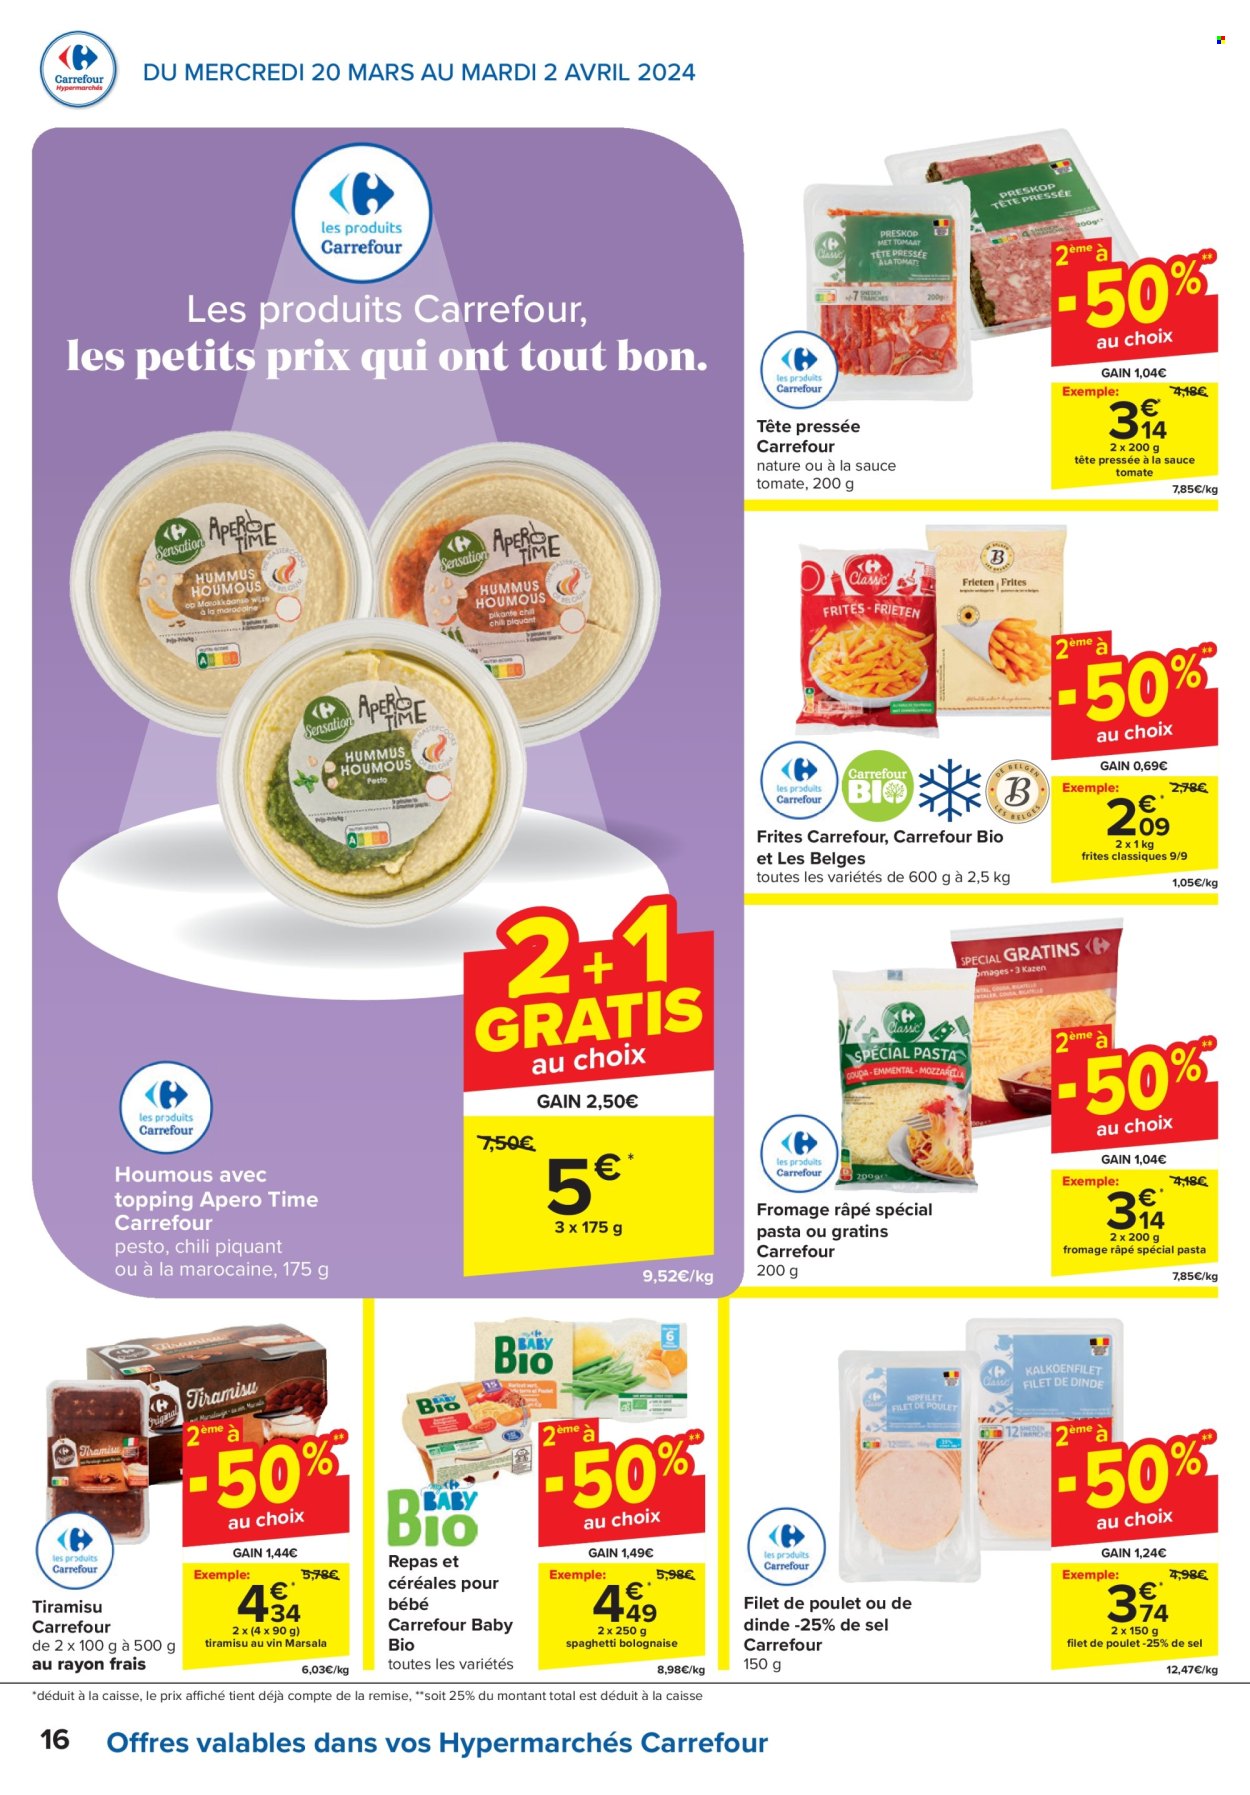 Catalogue Carrefour hypermarkt - 20.3.2024 - 2.4.2024. Page 16.